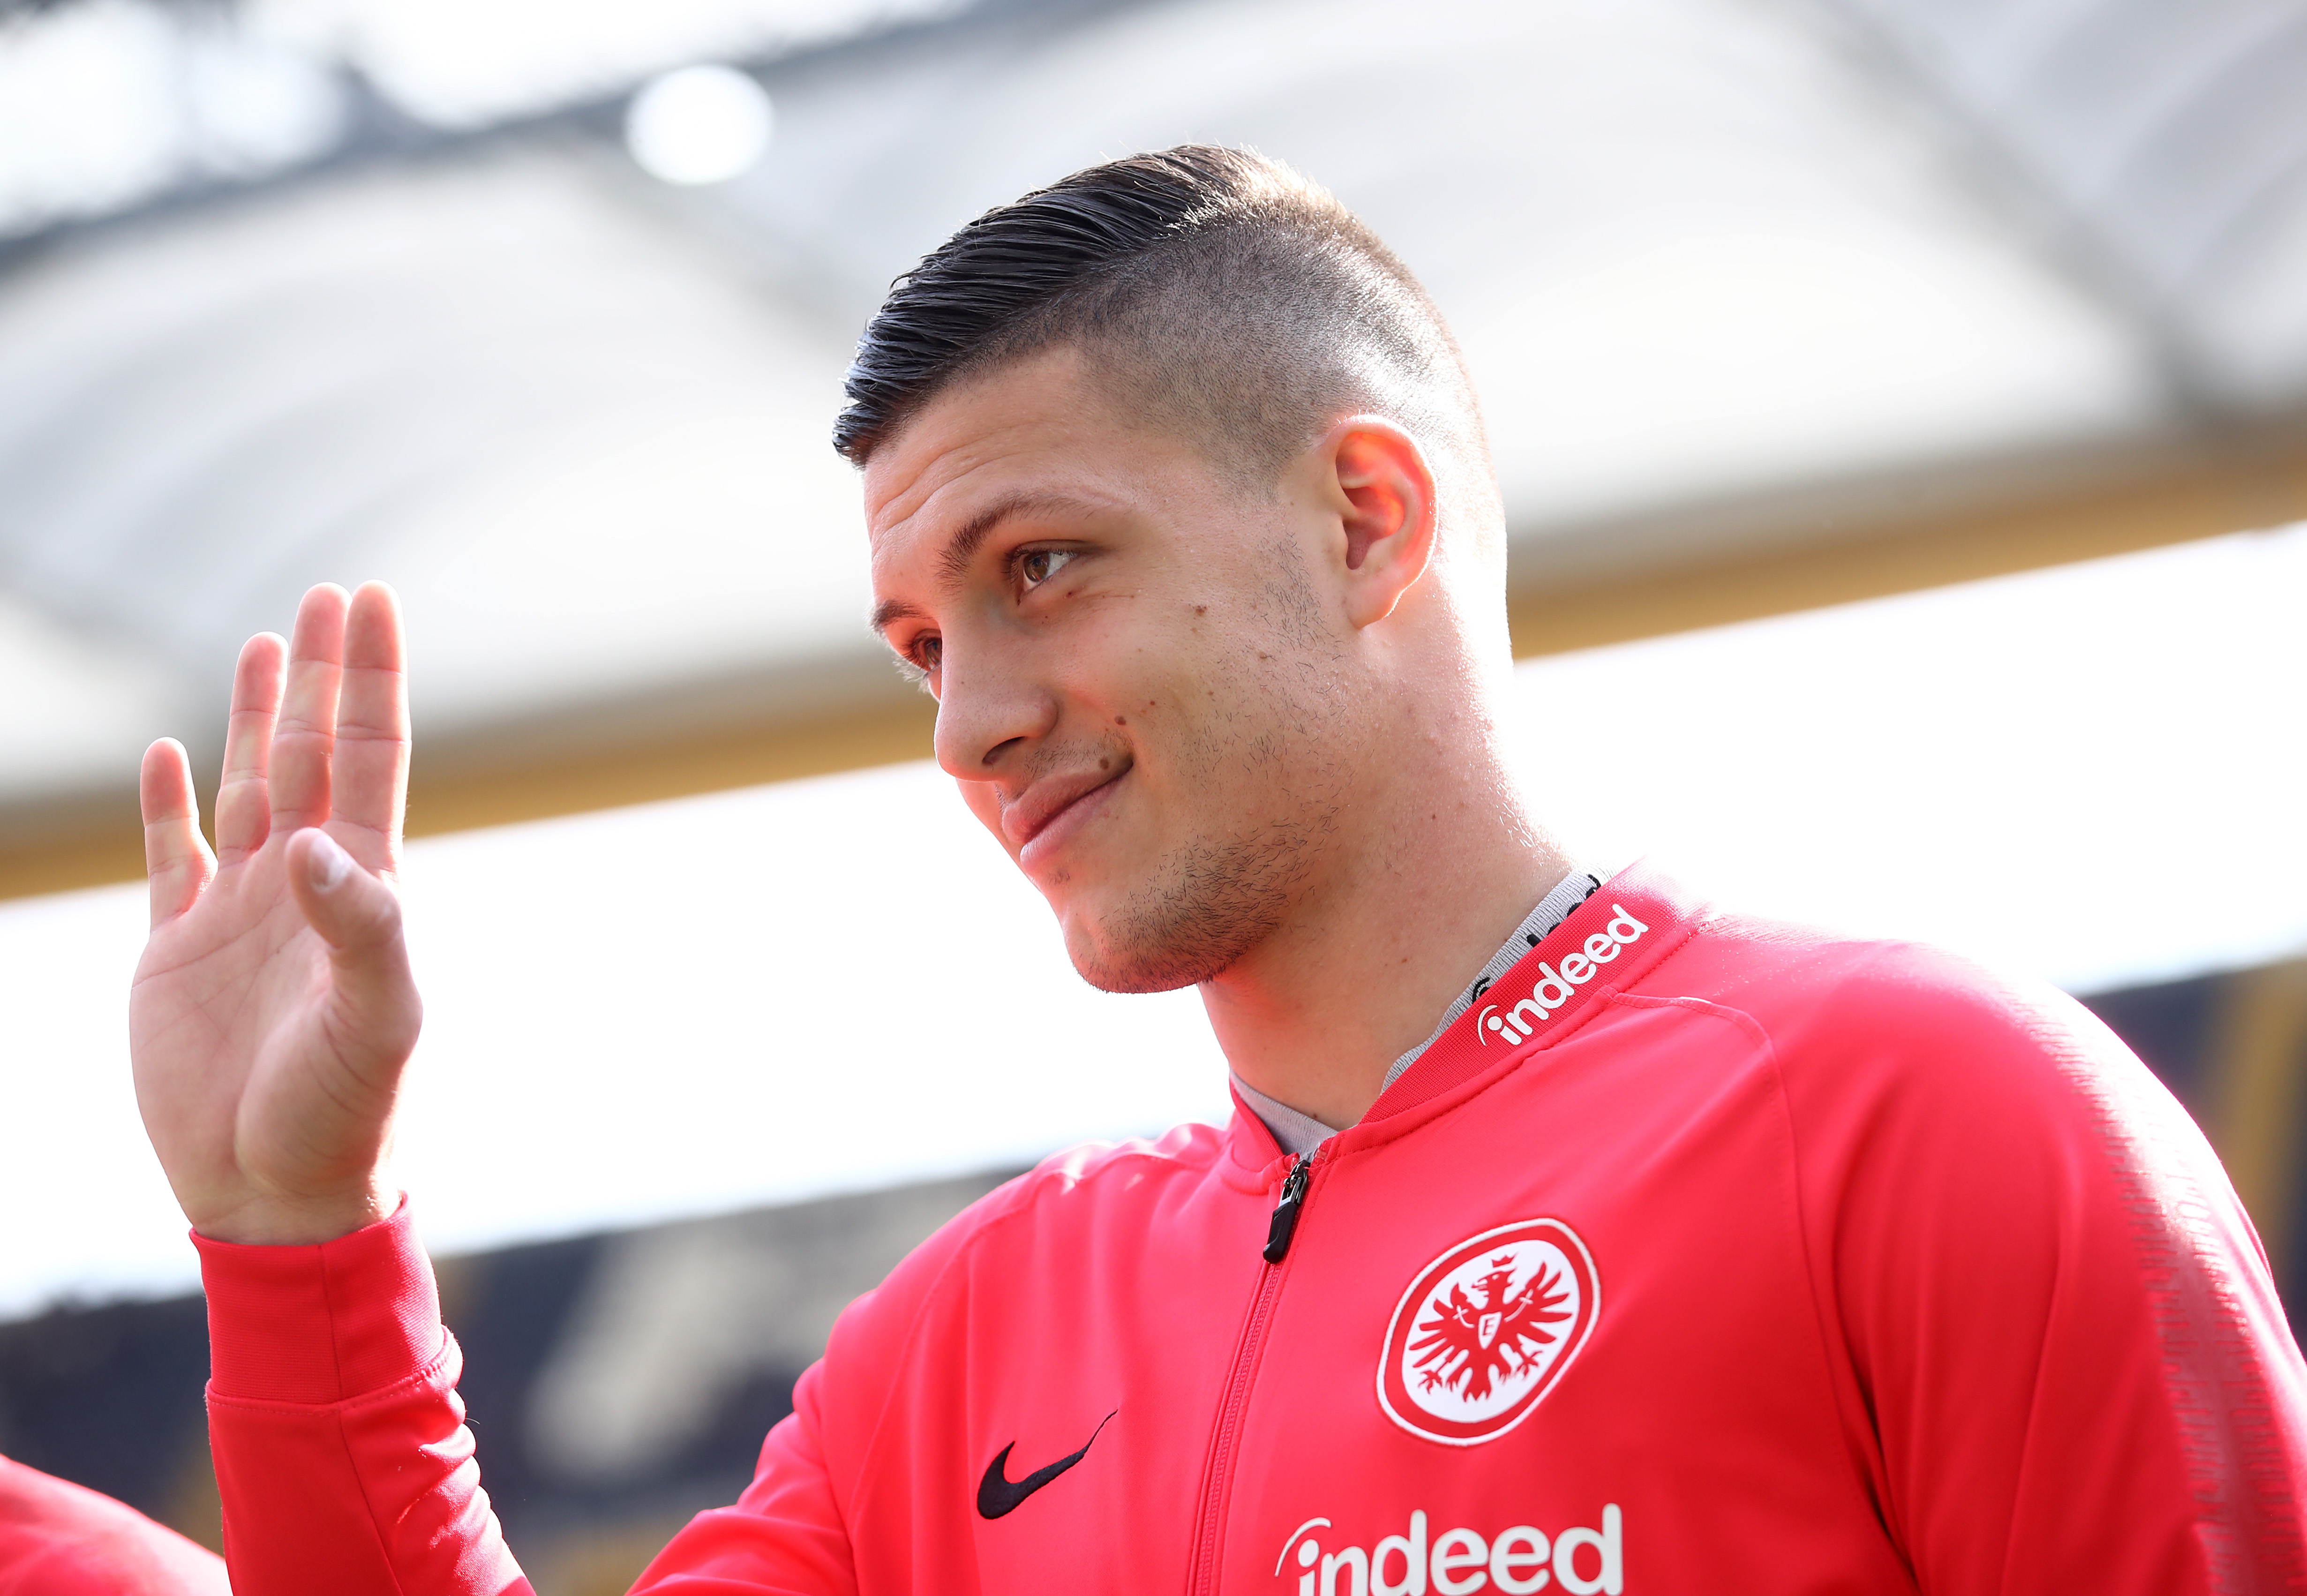 FRANKFURT AM MAIN, GERMANY - APRIL 14: Luka Jovic of Frankfurt waves to fans before the kick off of  the Bundesliga match between Eintracht Frankfurt and FC Augsburg at Commerzbank-Arena on April 14, 2019 in Frankfurt am Main, Germany. (Photo by Alex Grimm/Bongarts/Getty Images)